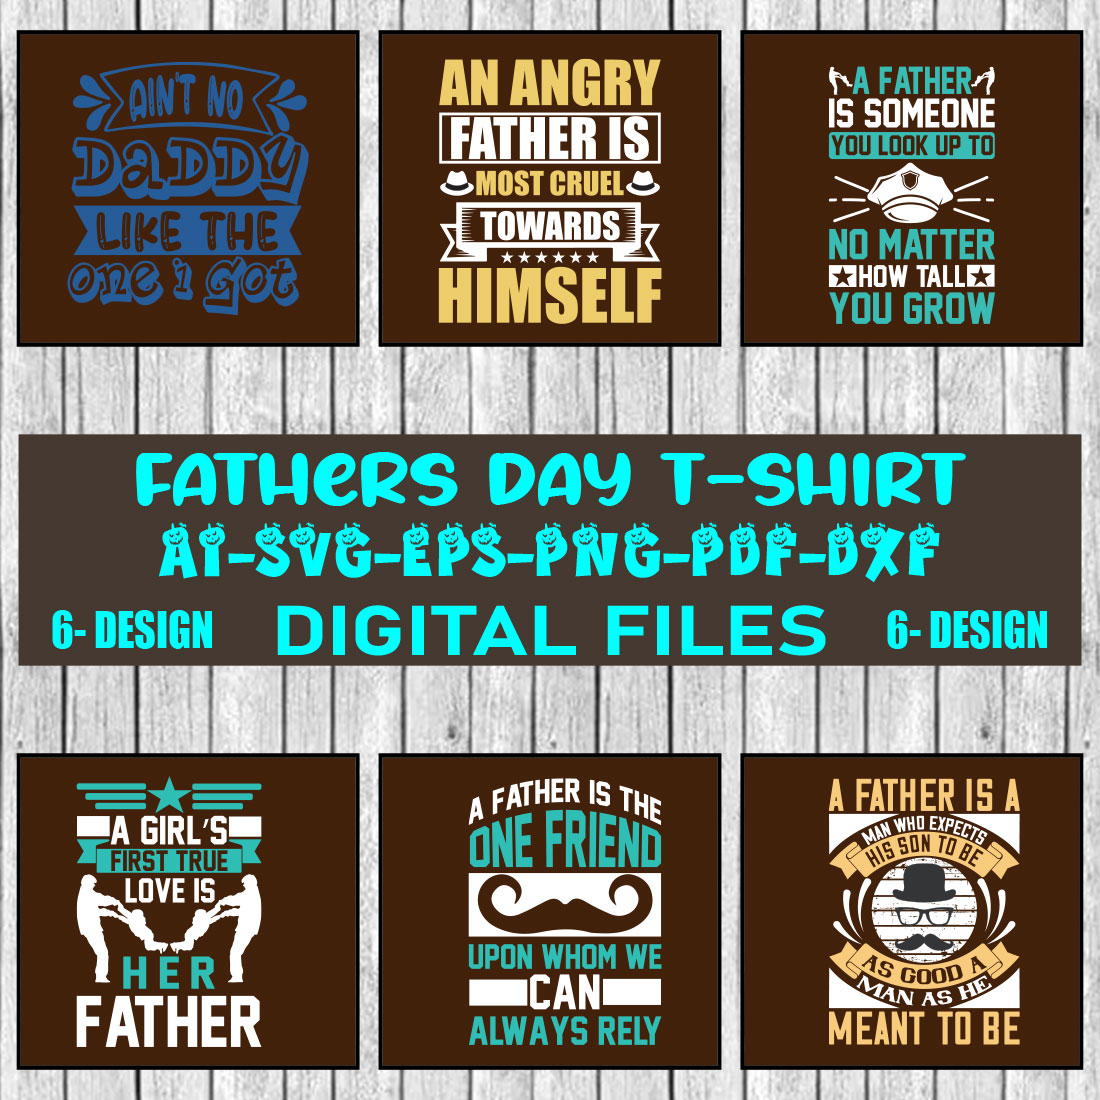 Father's Day Bundle SVG Dad Bundle Svg png dxf Funny Dad Svg Father's Day SVG dad Decal Designs papa,Dad Life SVG cut file silhouette Cricu Vol-05 cover image.